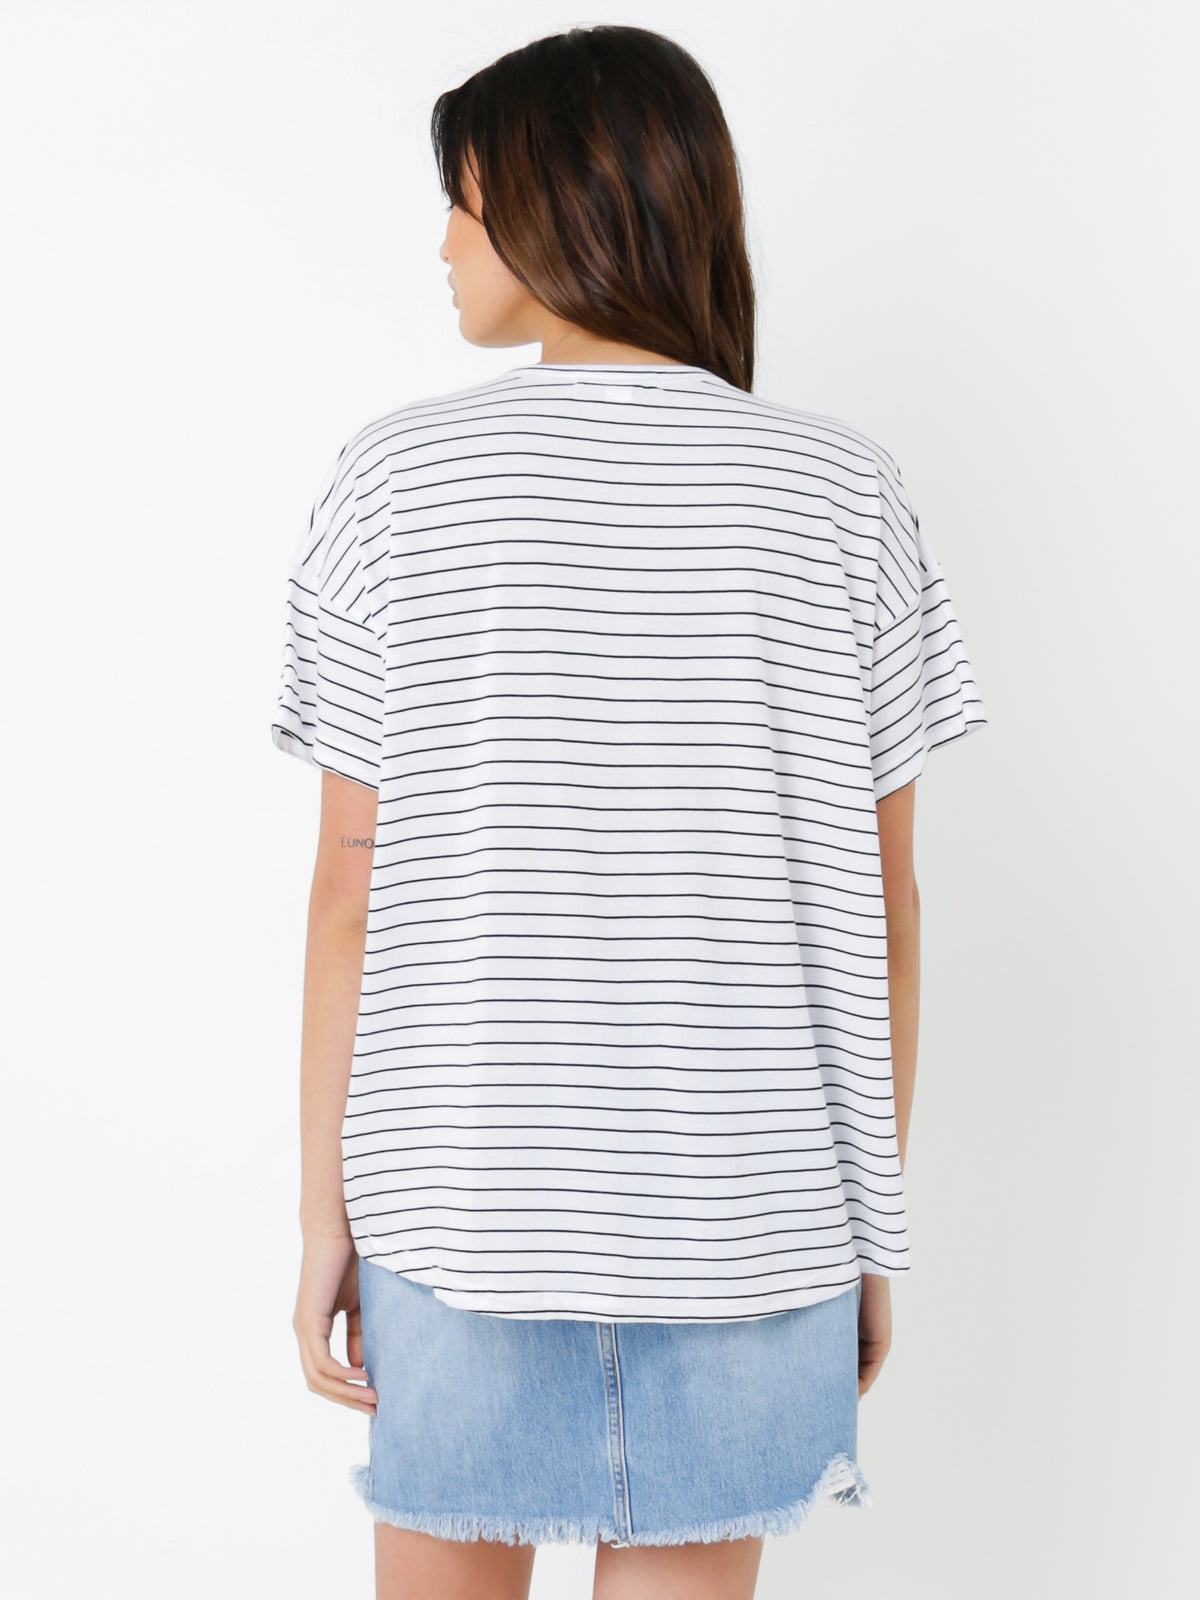 Springfield Cocoon T-Shirt in Black &amp; White Stripe